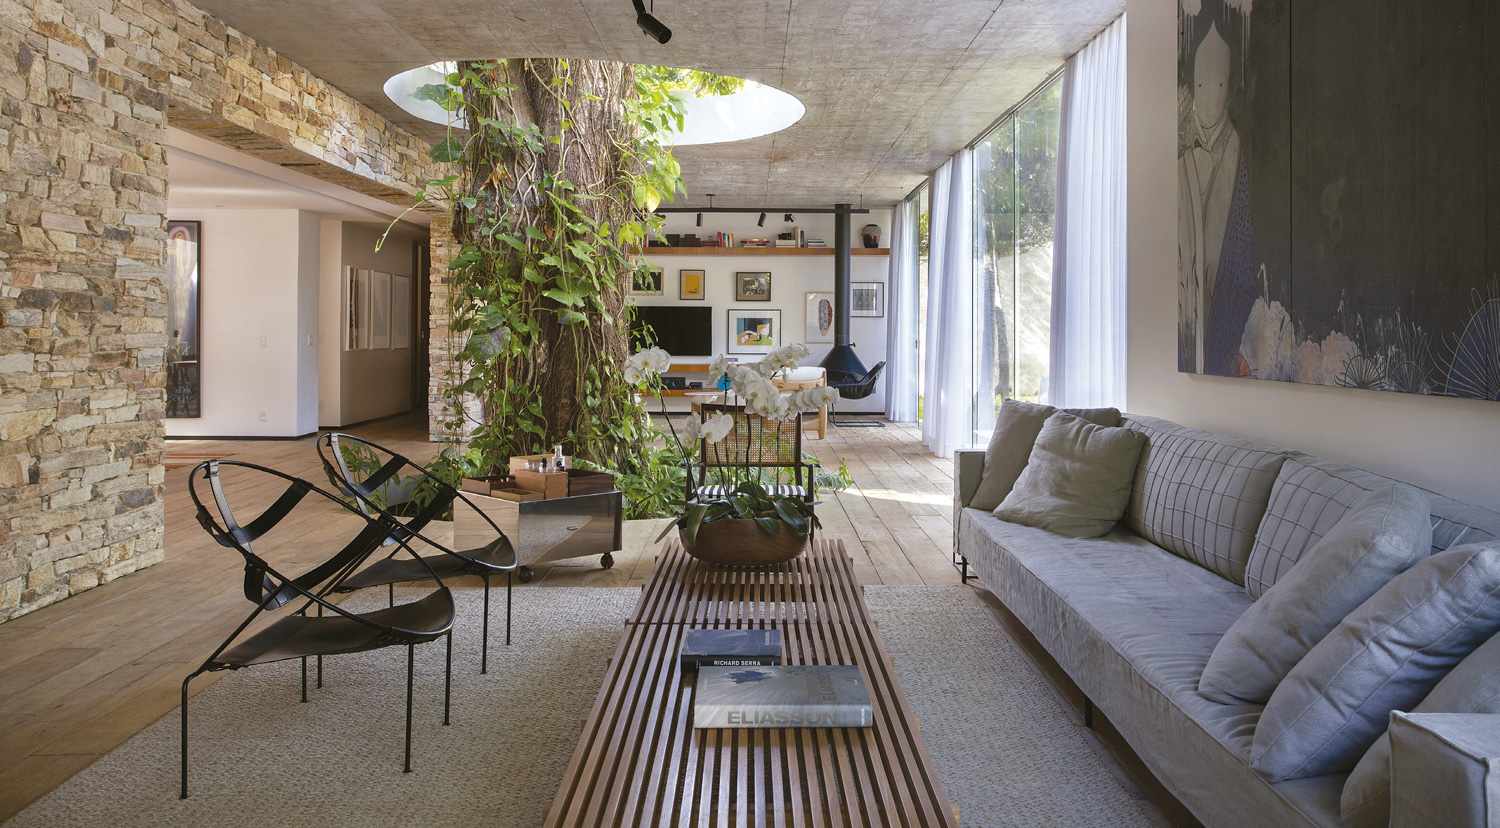 A home with a tree at its heart, designed by Alessandro Sartore in Rio de Janeiro, Brazil 